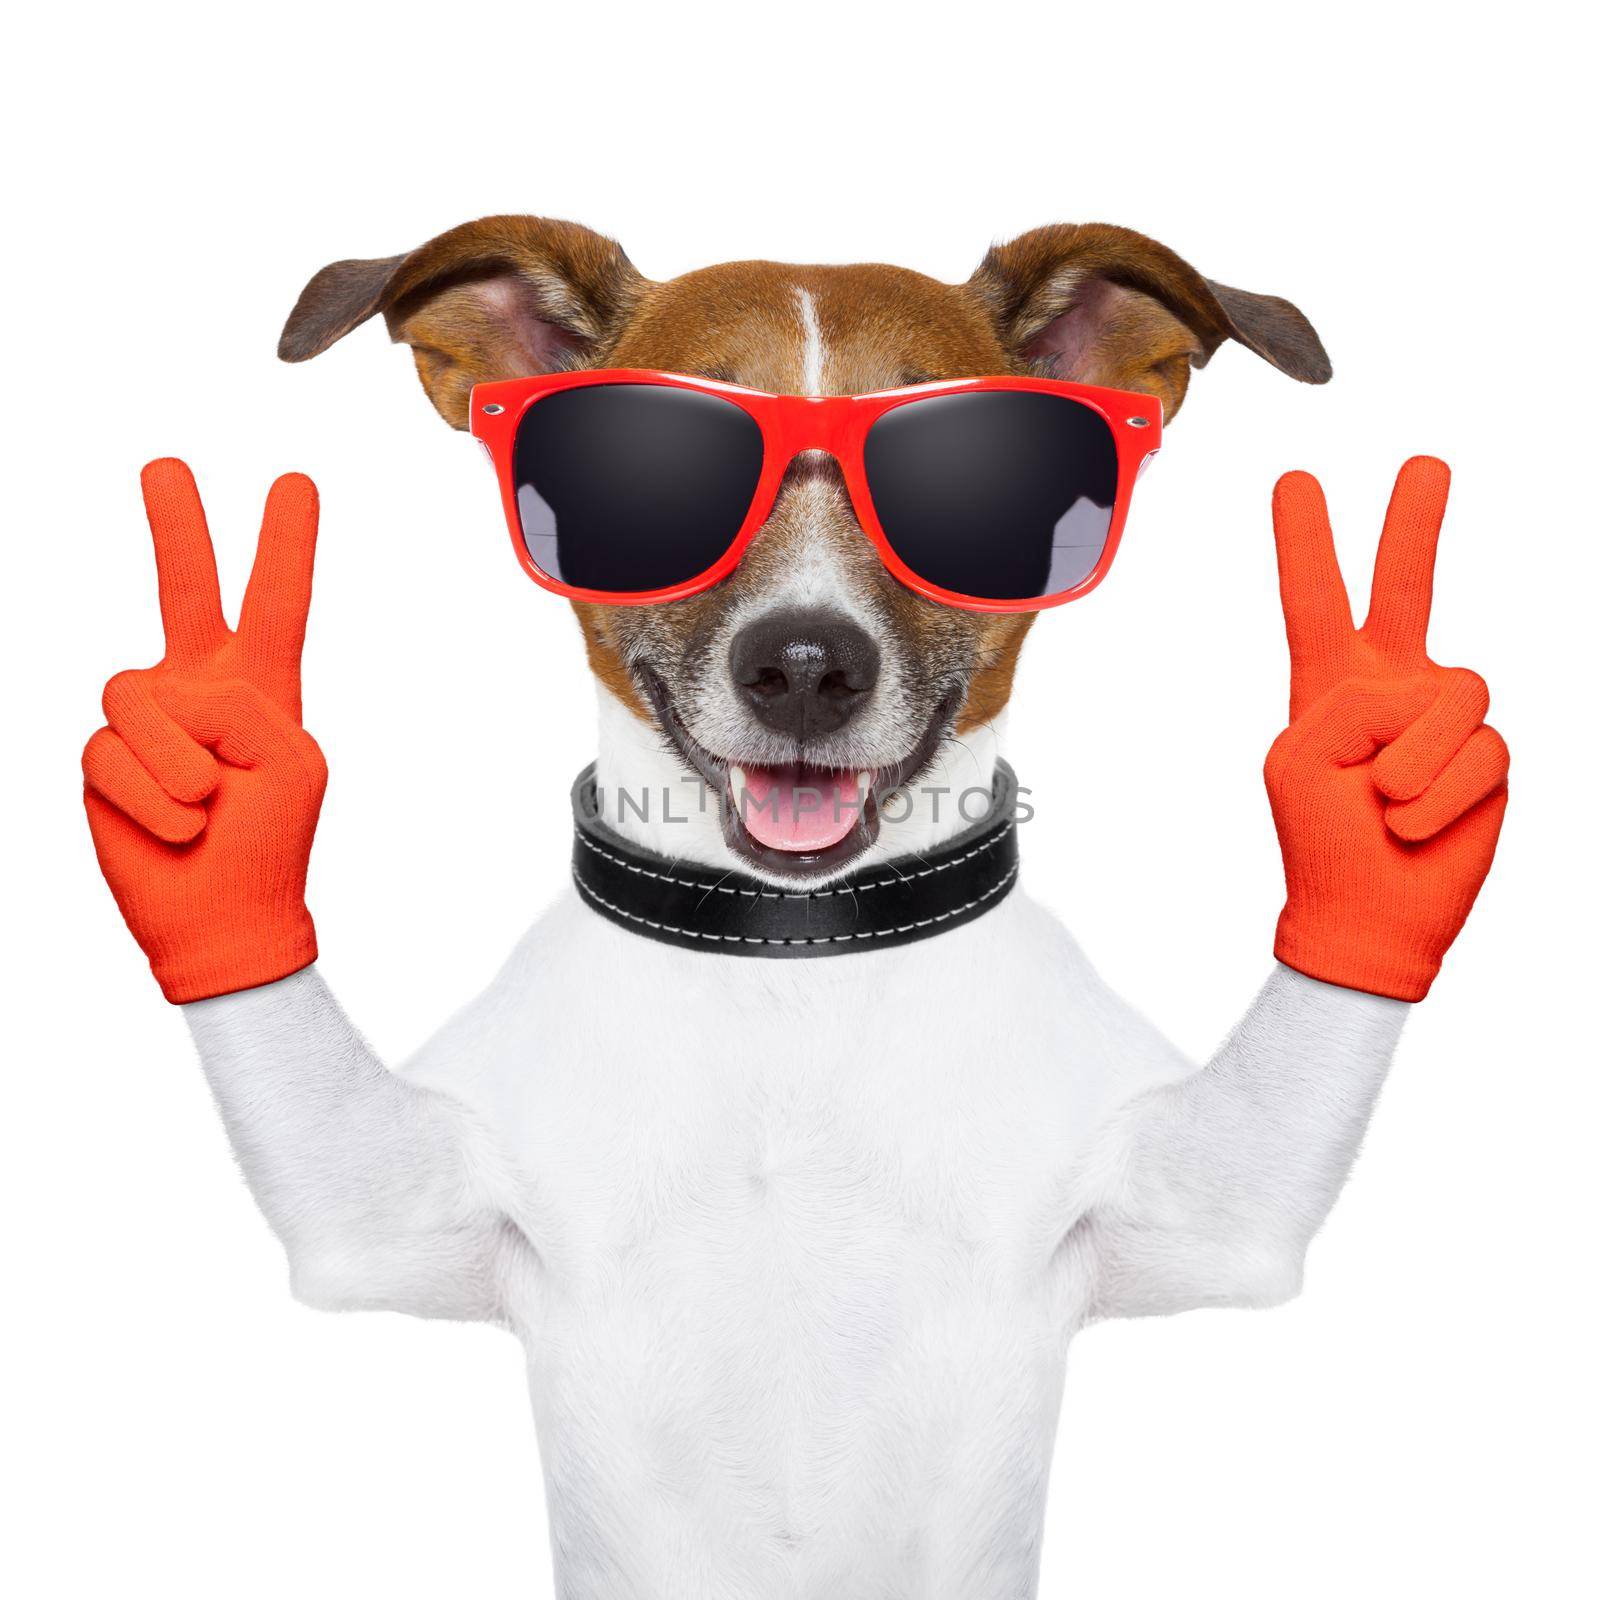 peace and victory fingers dog by Brosch